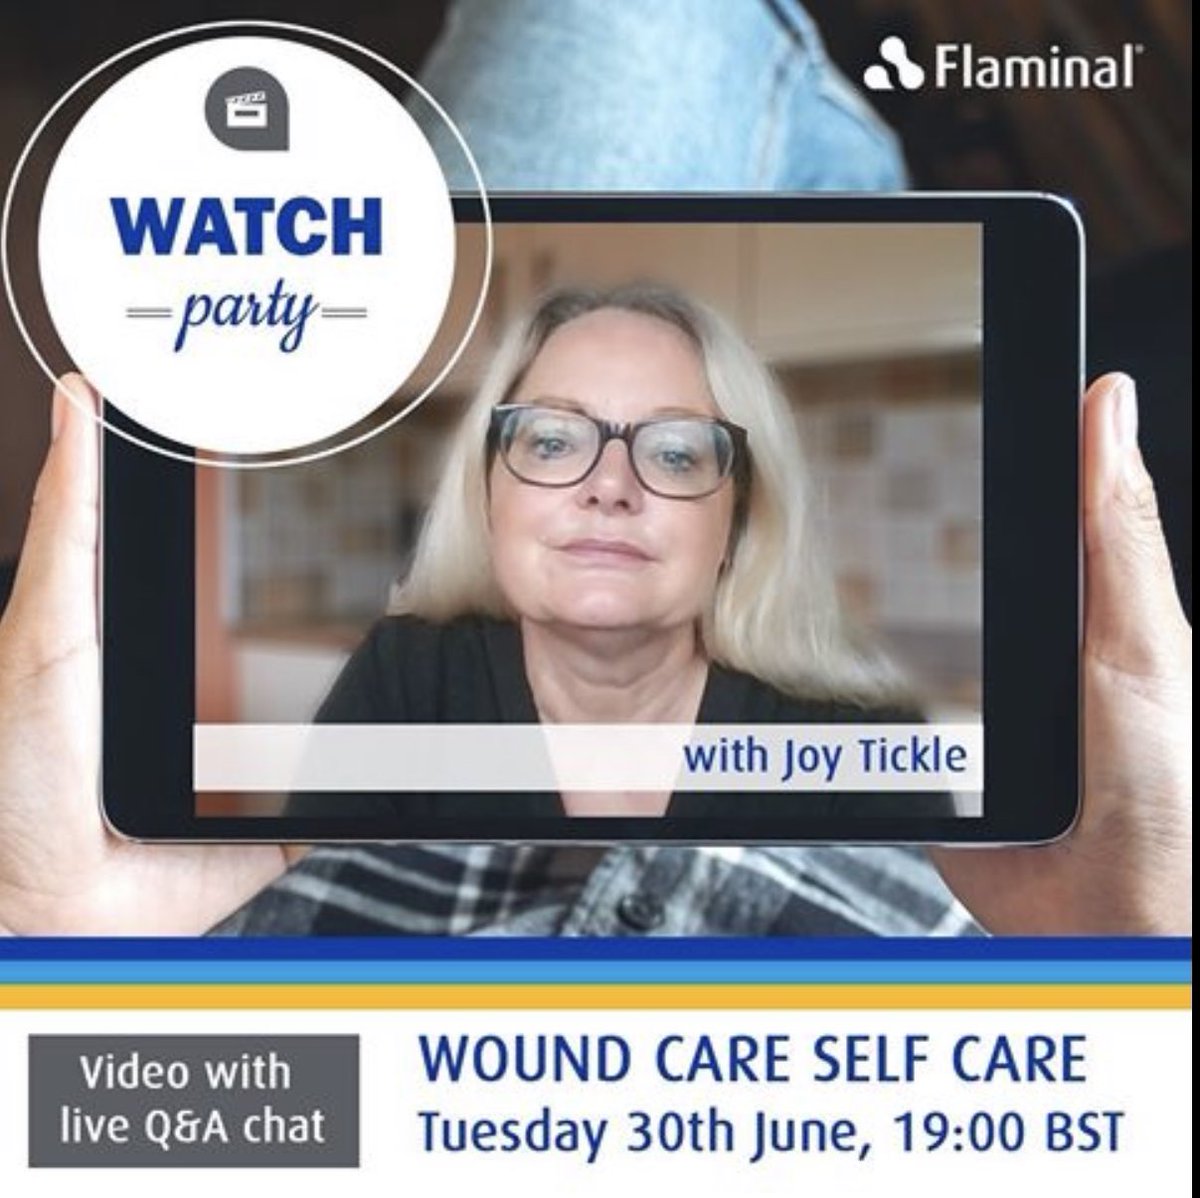 Join Joy Tickle Tissue Viability Nurse Specialist, on Tuesday 30th June at 7pm for this watch party on “wound care self care” Joy will be watching with us and available to chat in the comments throughout #iamflenhealth #flaminal #selfcare #strongertogether  #woundcare #nurses